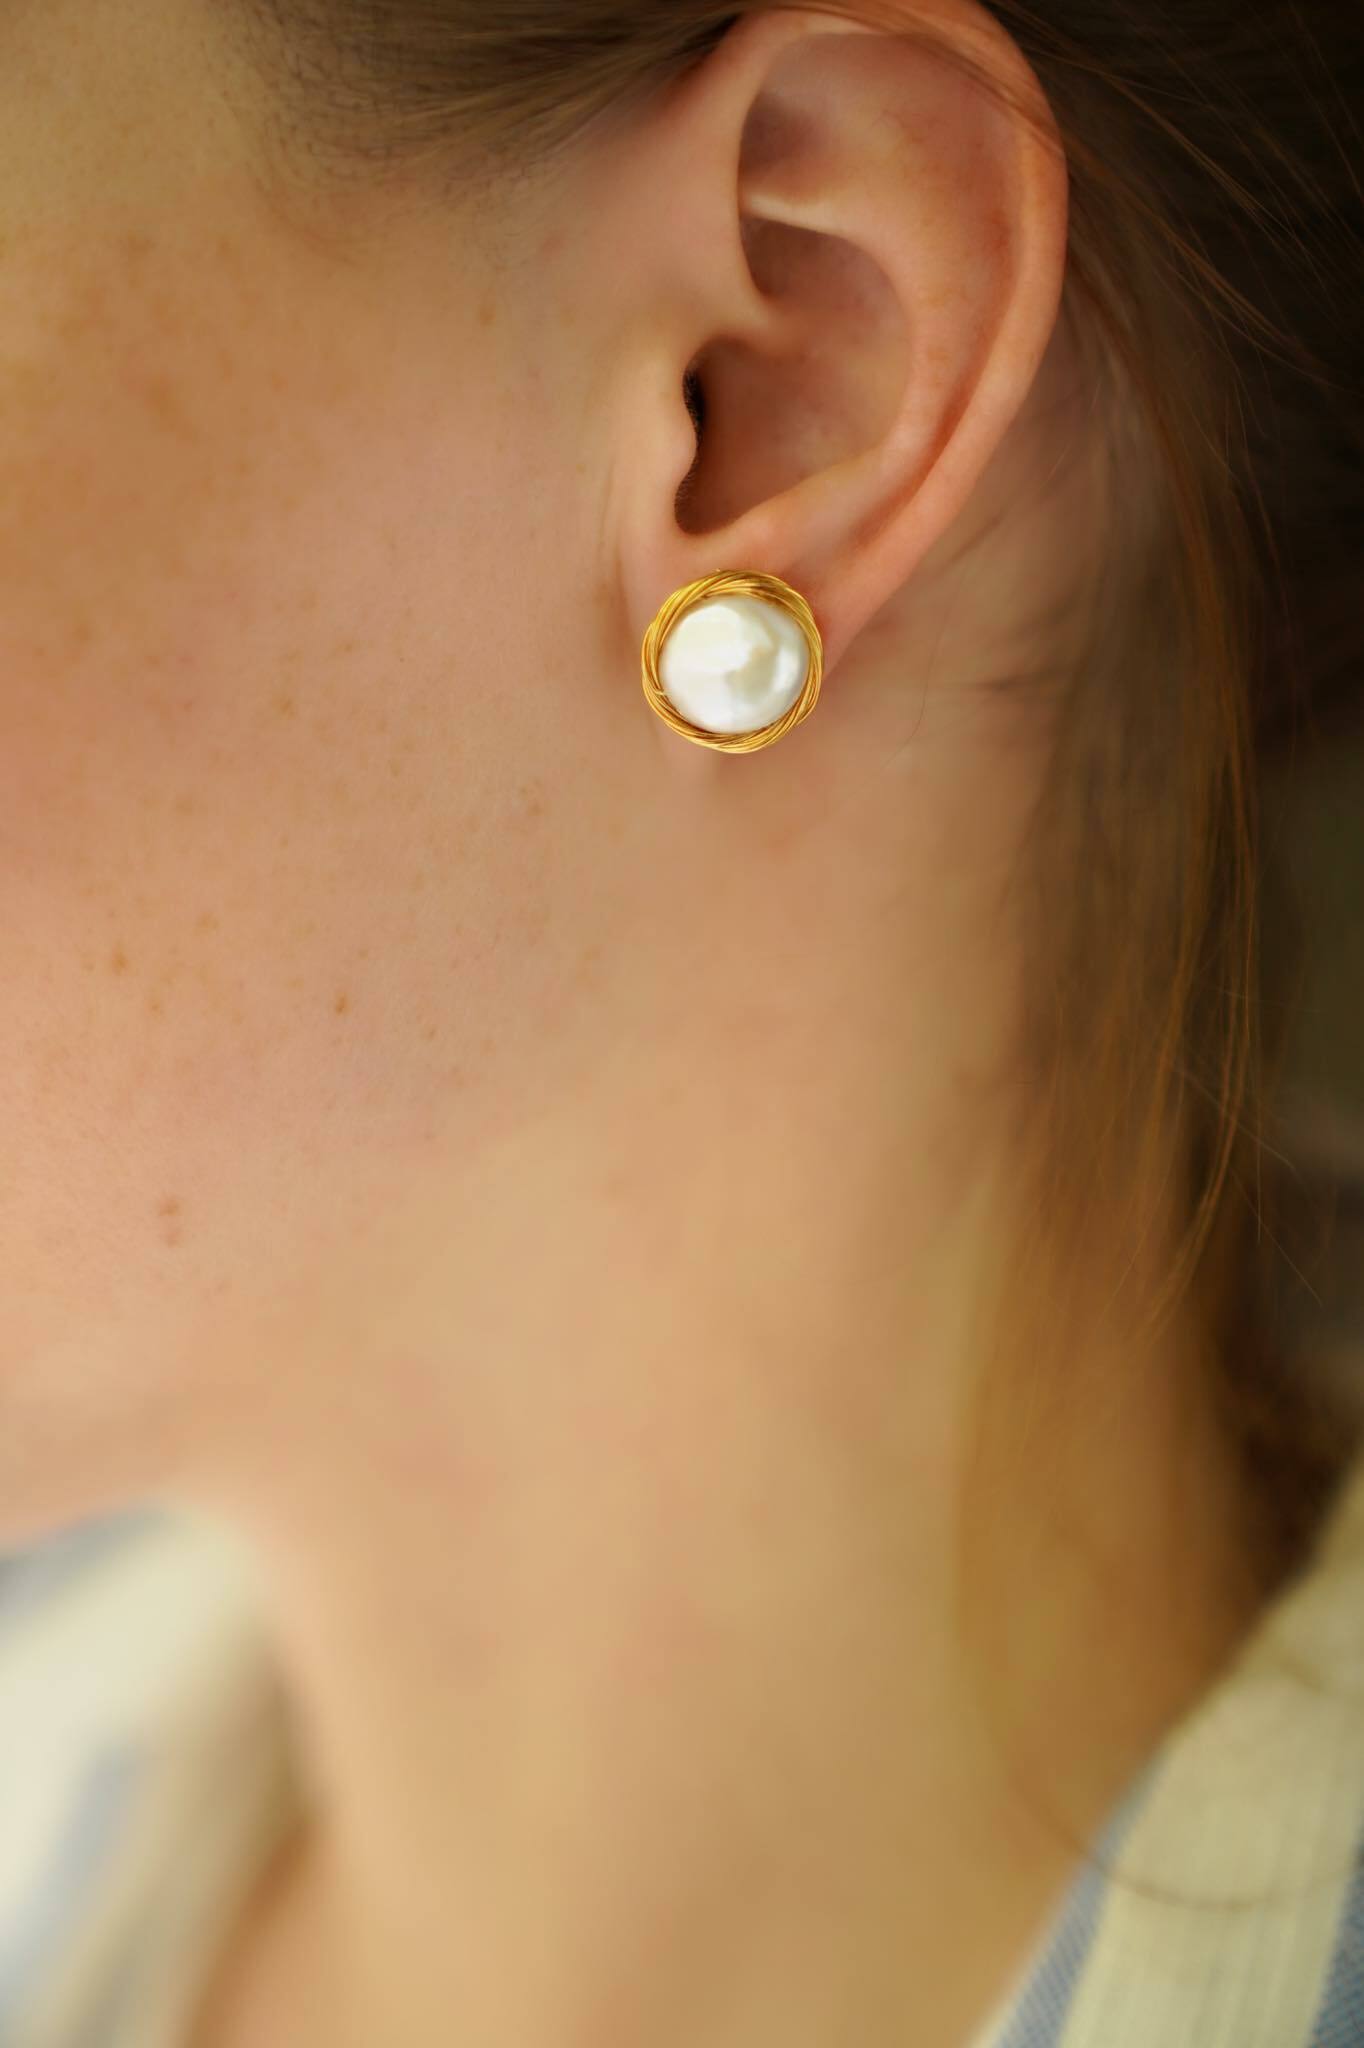 Gold plated earrings with natural pearls